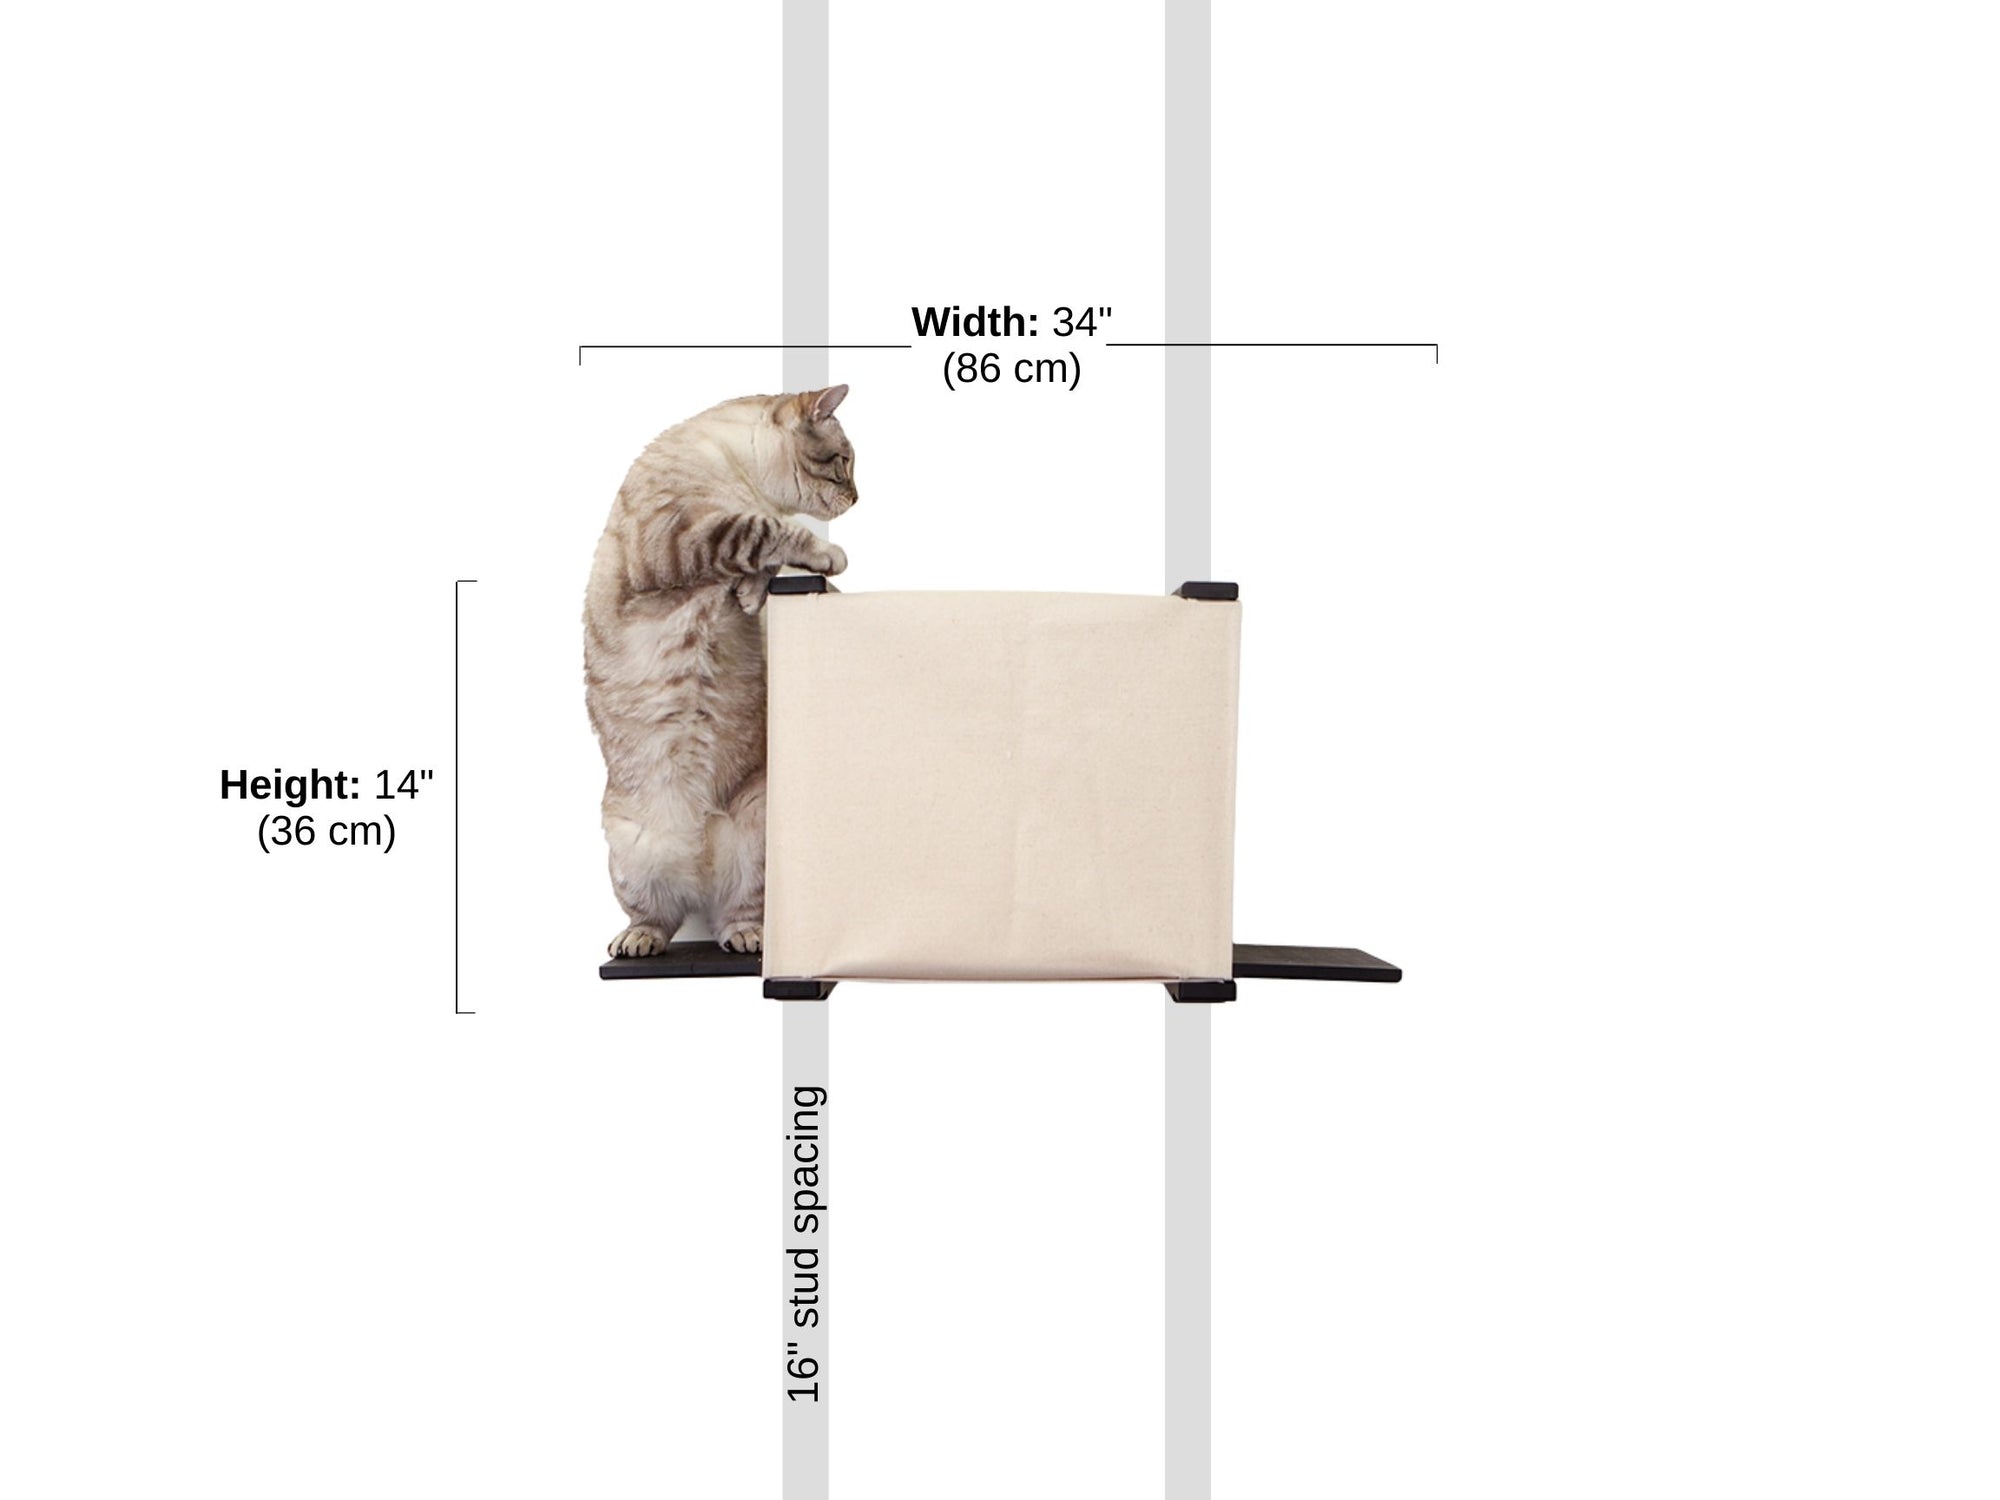 Diagram depicting Cubby with Ledges mounted to wall with 16" stud spacings. Width: 34" (86 cm) Height: 14" (36 cm)